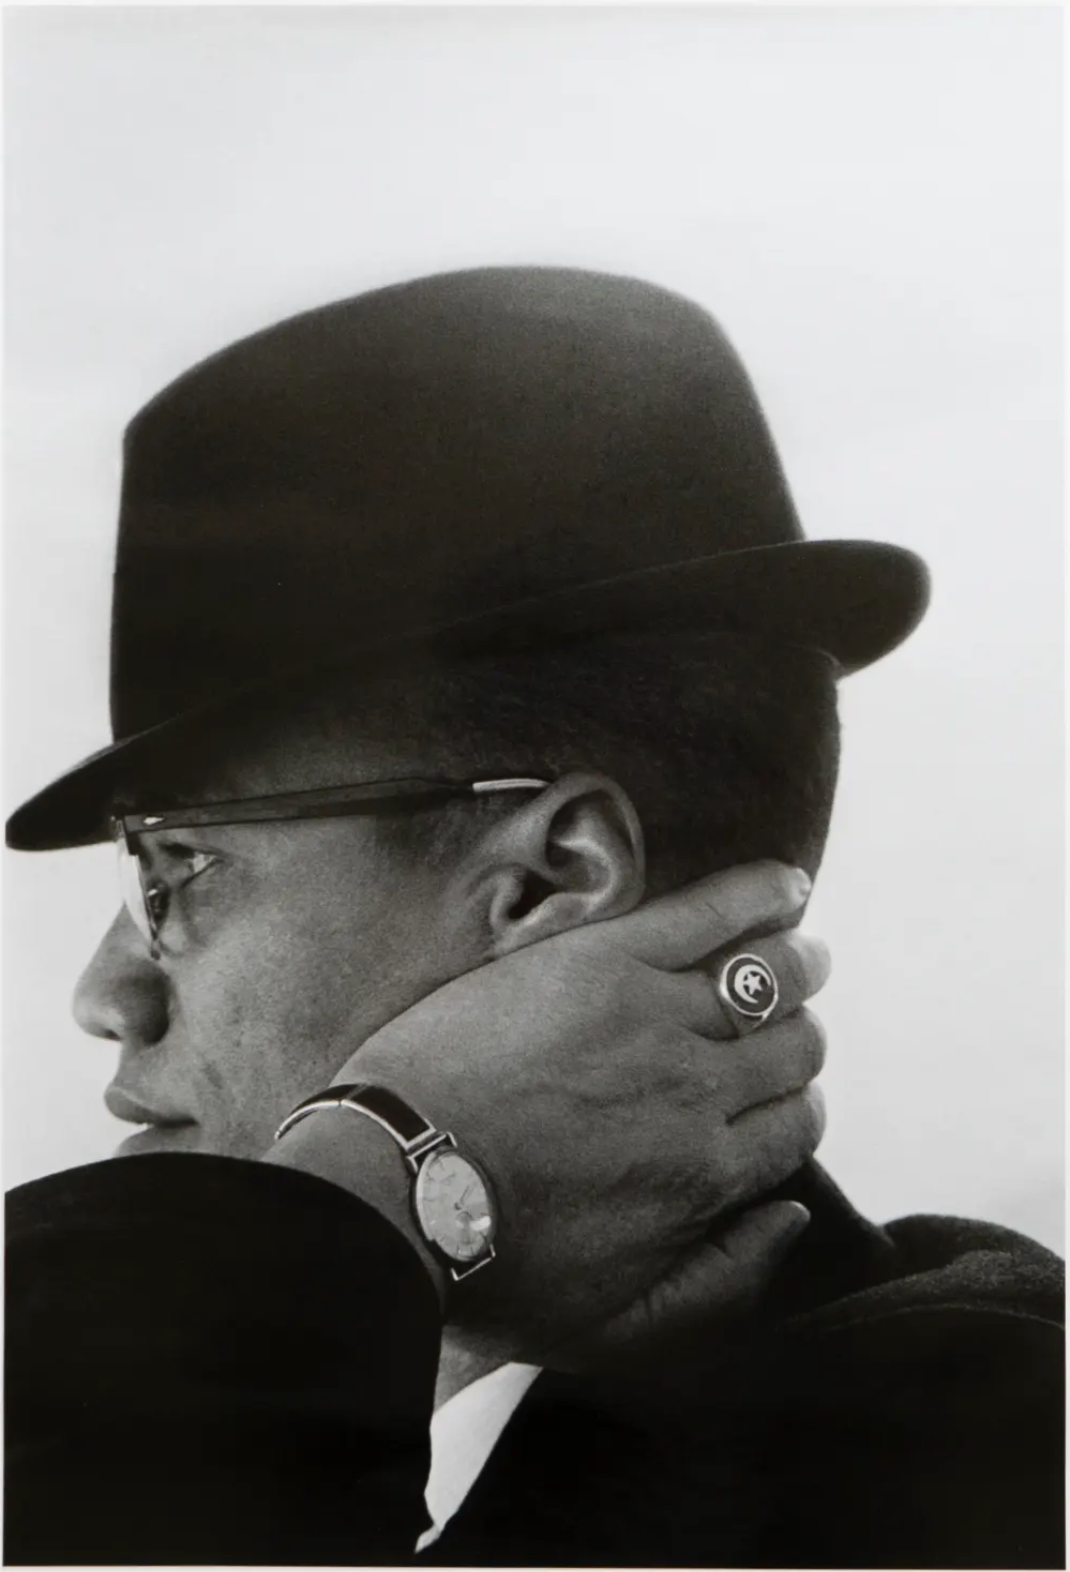 ‘Malcolm X’ by Eve Arnold, 1962